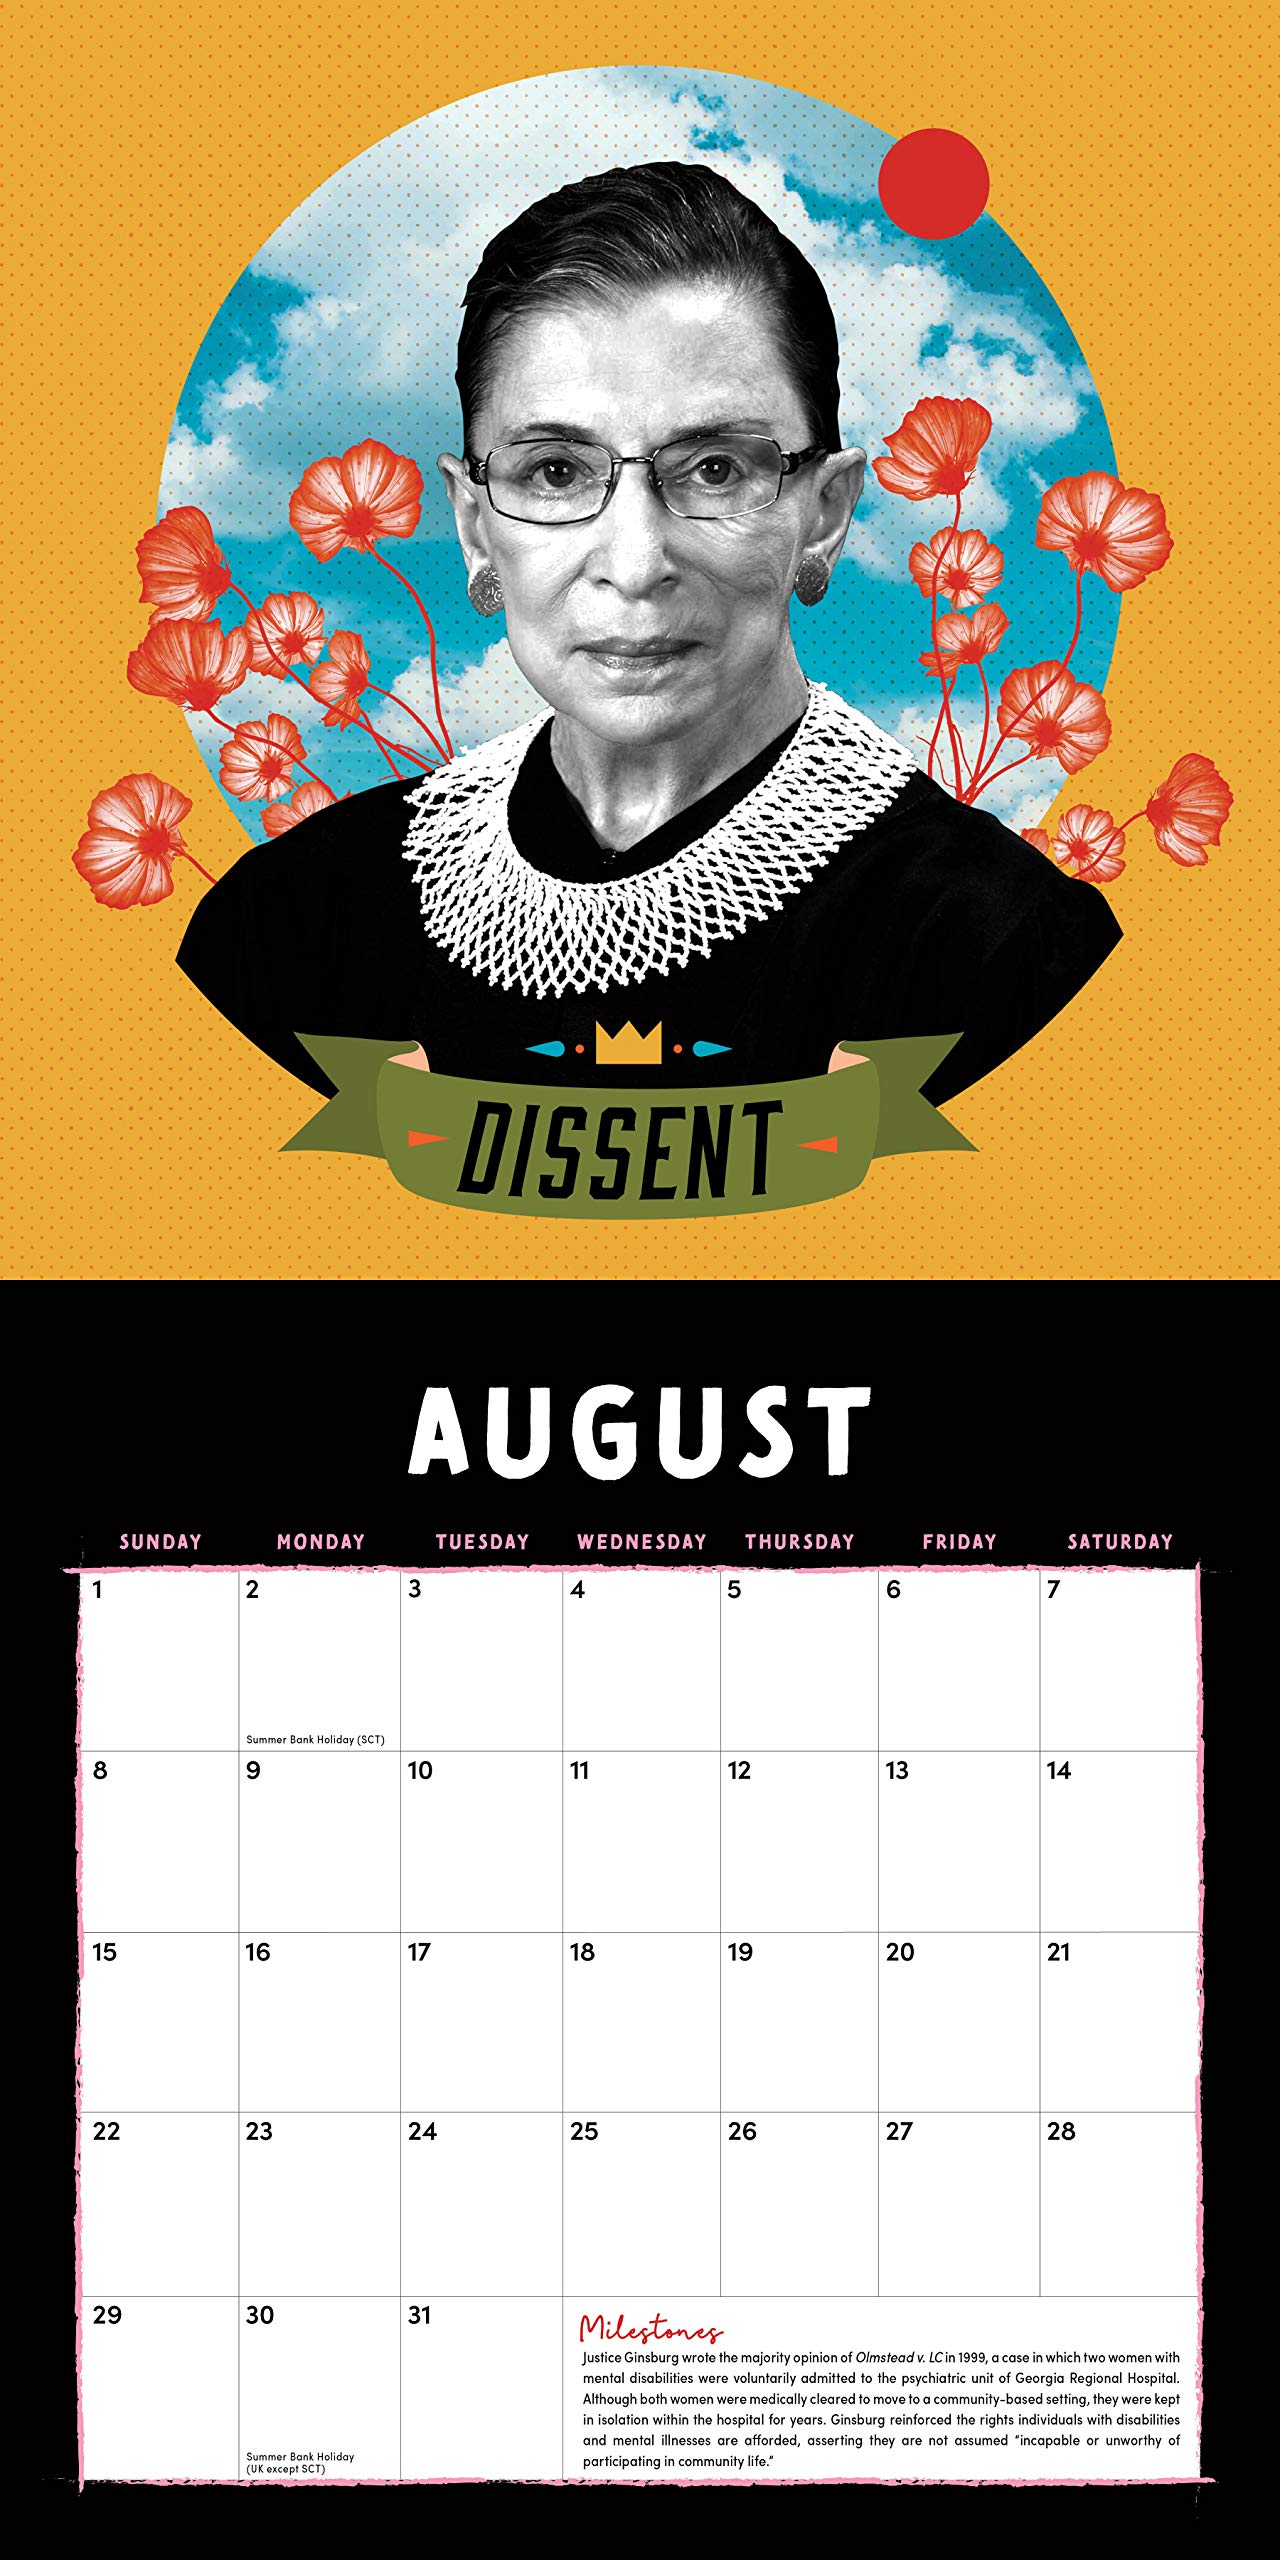 2021 The Legacy of Ruth Bader Ginsburg Wall Calendar: Her Words of Hope, Equality and Inspiration ― A yearlong tribute to the notorious RBG (12-Month Monthly Calendar)